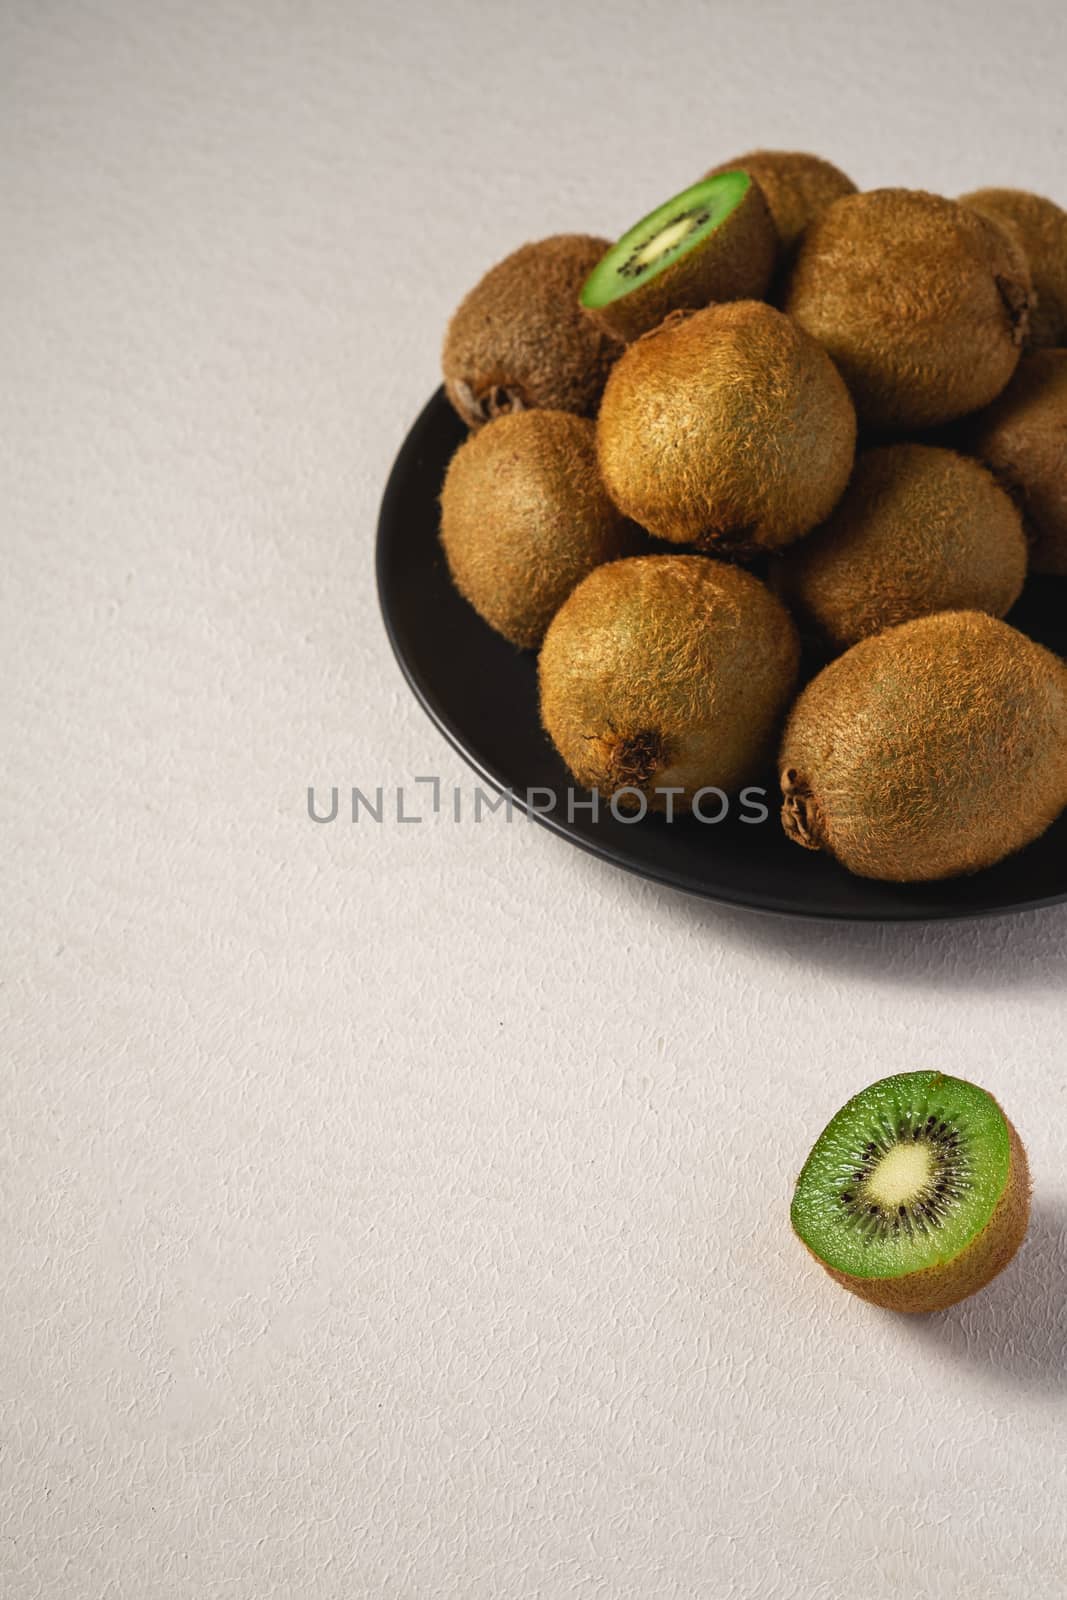 Kiwi fruits half sliced in black plate on vibrant plain white background, copy space, angle view